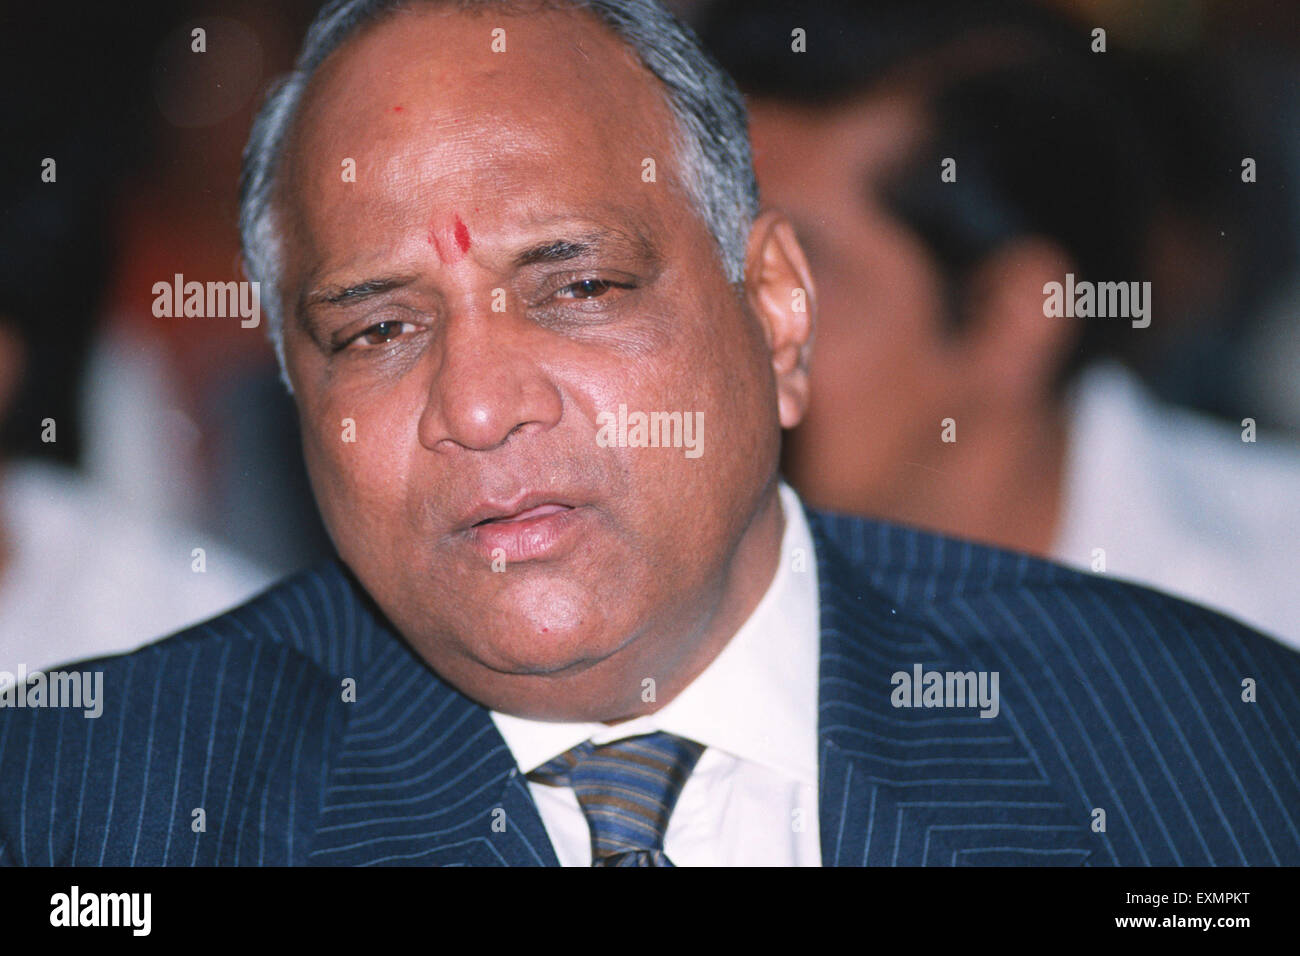 South Asian Indian politician Sharad Pawar the president of the Nationalist Congress Party India Stock Photo